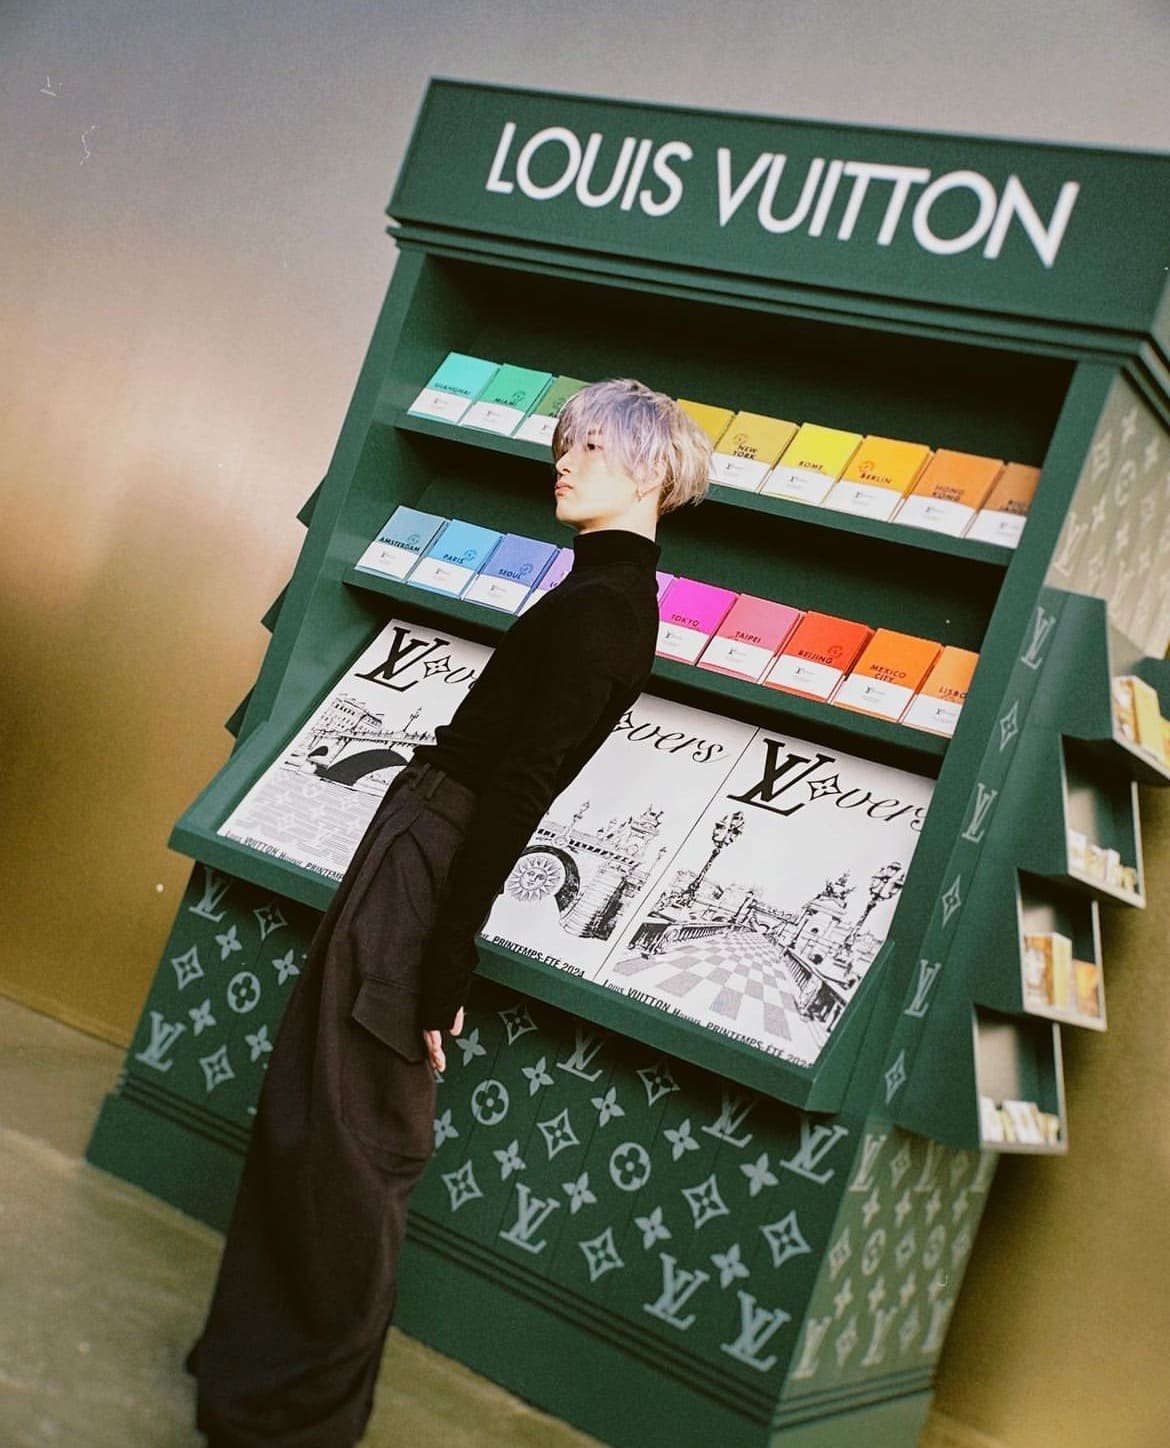 Exclusive! On The Go With Jackson Wang and Louis Vuitton: The